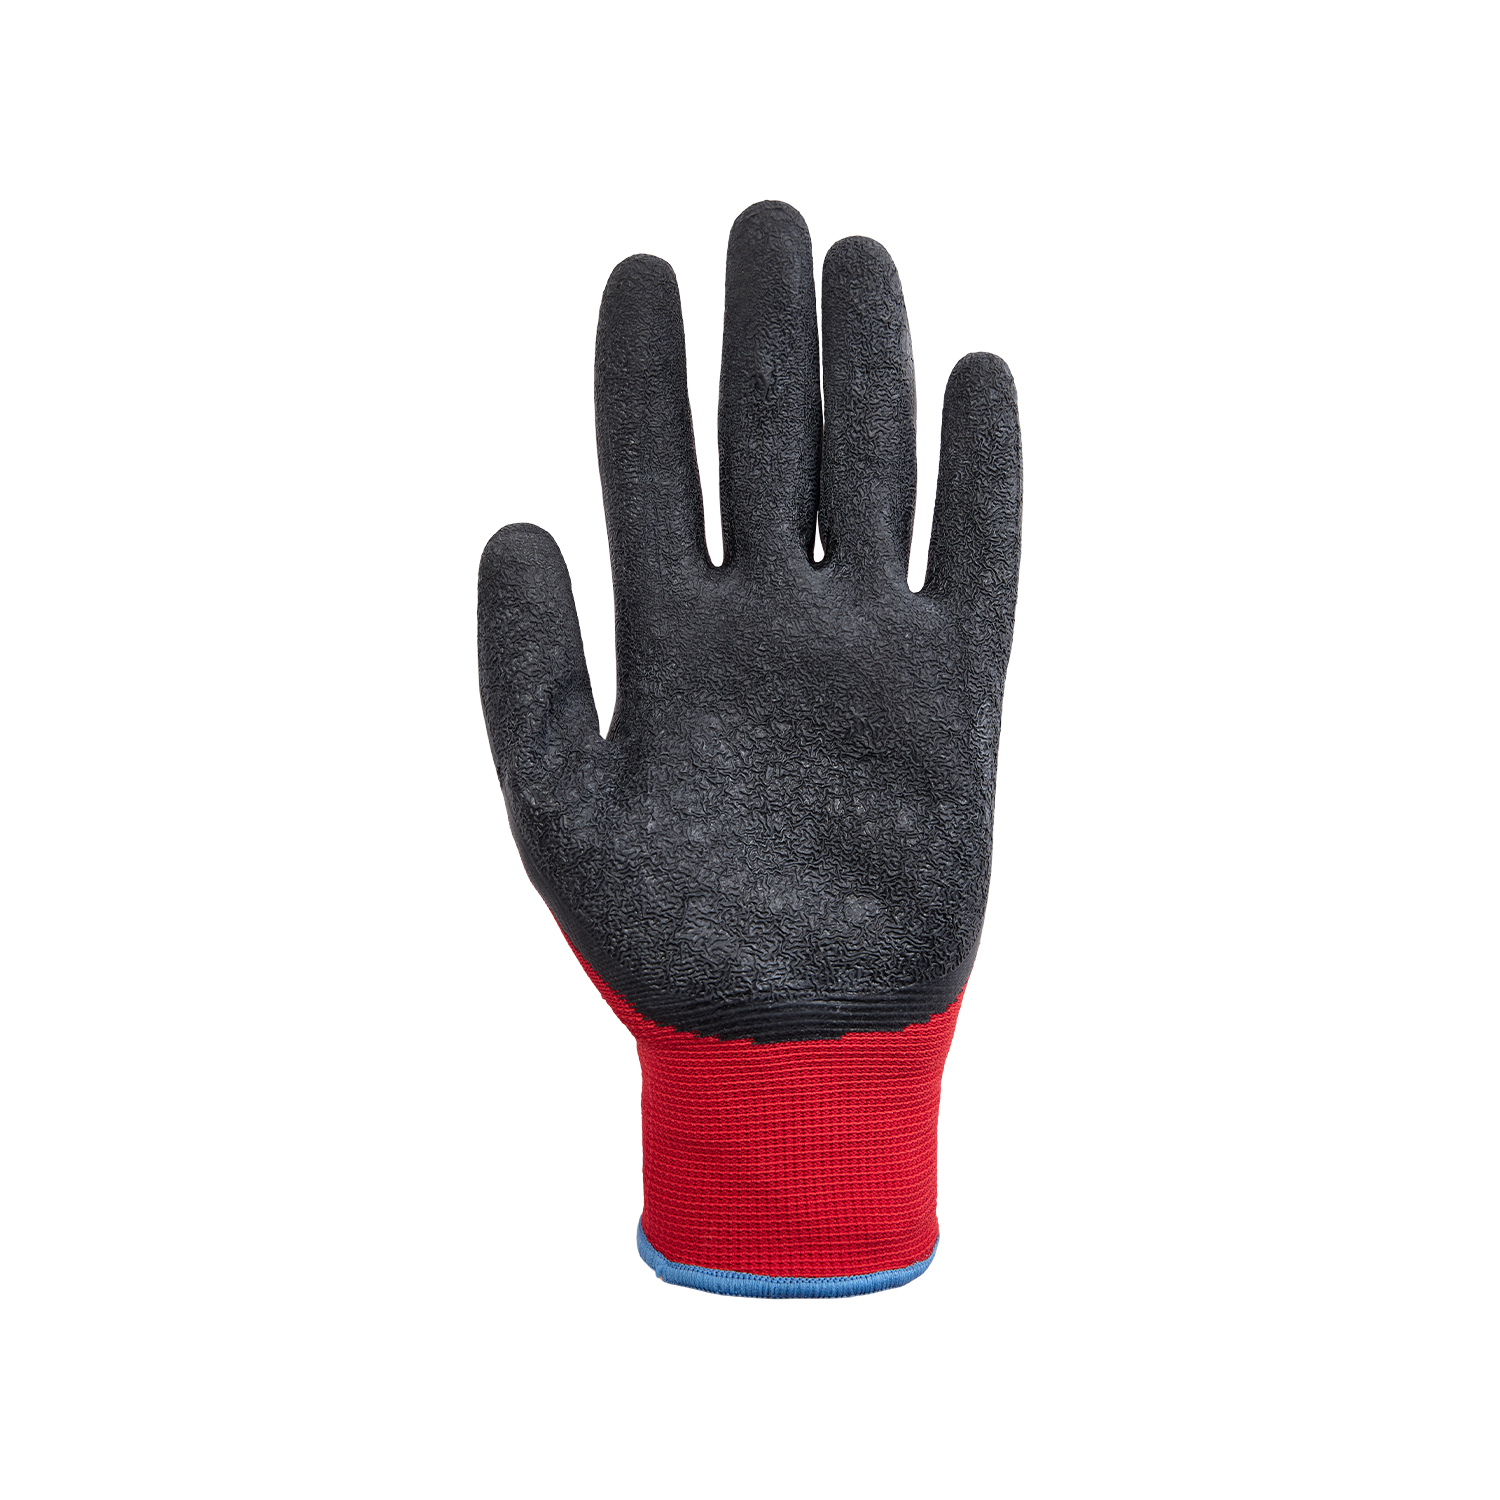 NORSE PowerGrip assembly gloves size 8